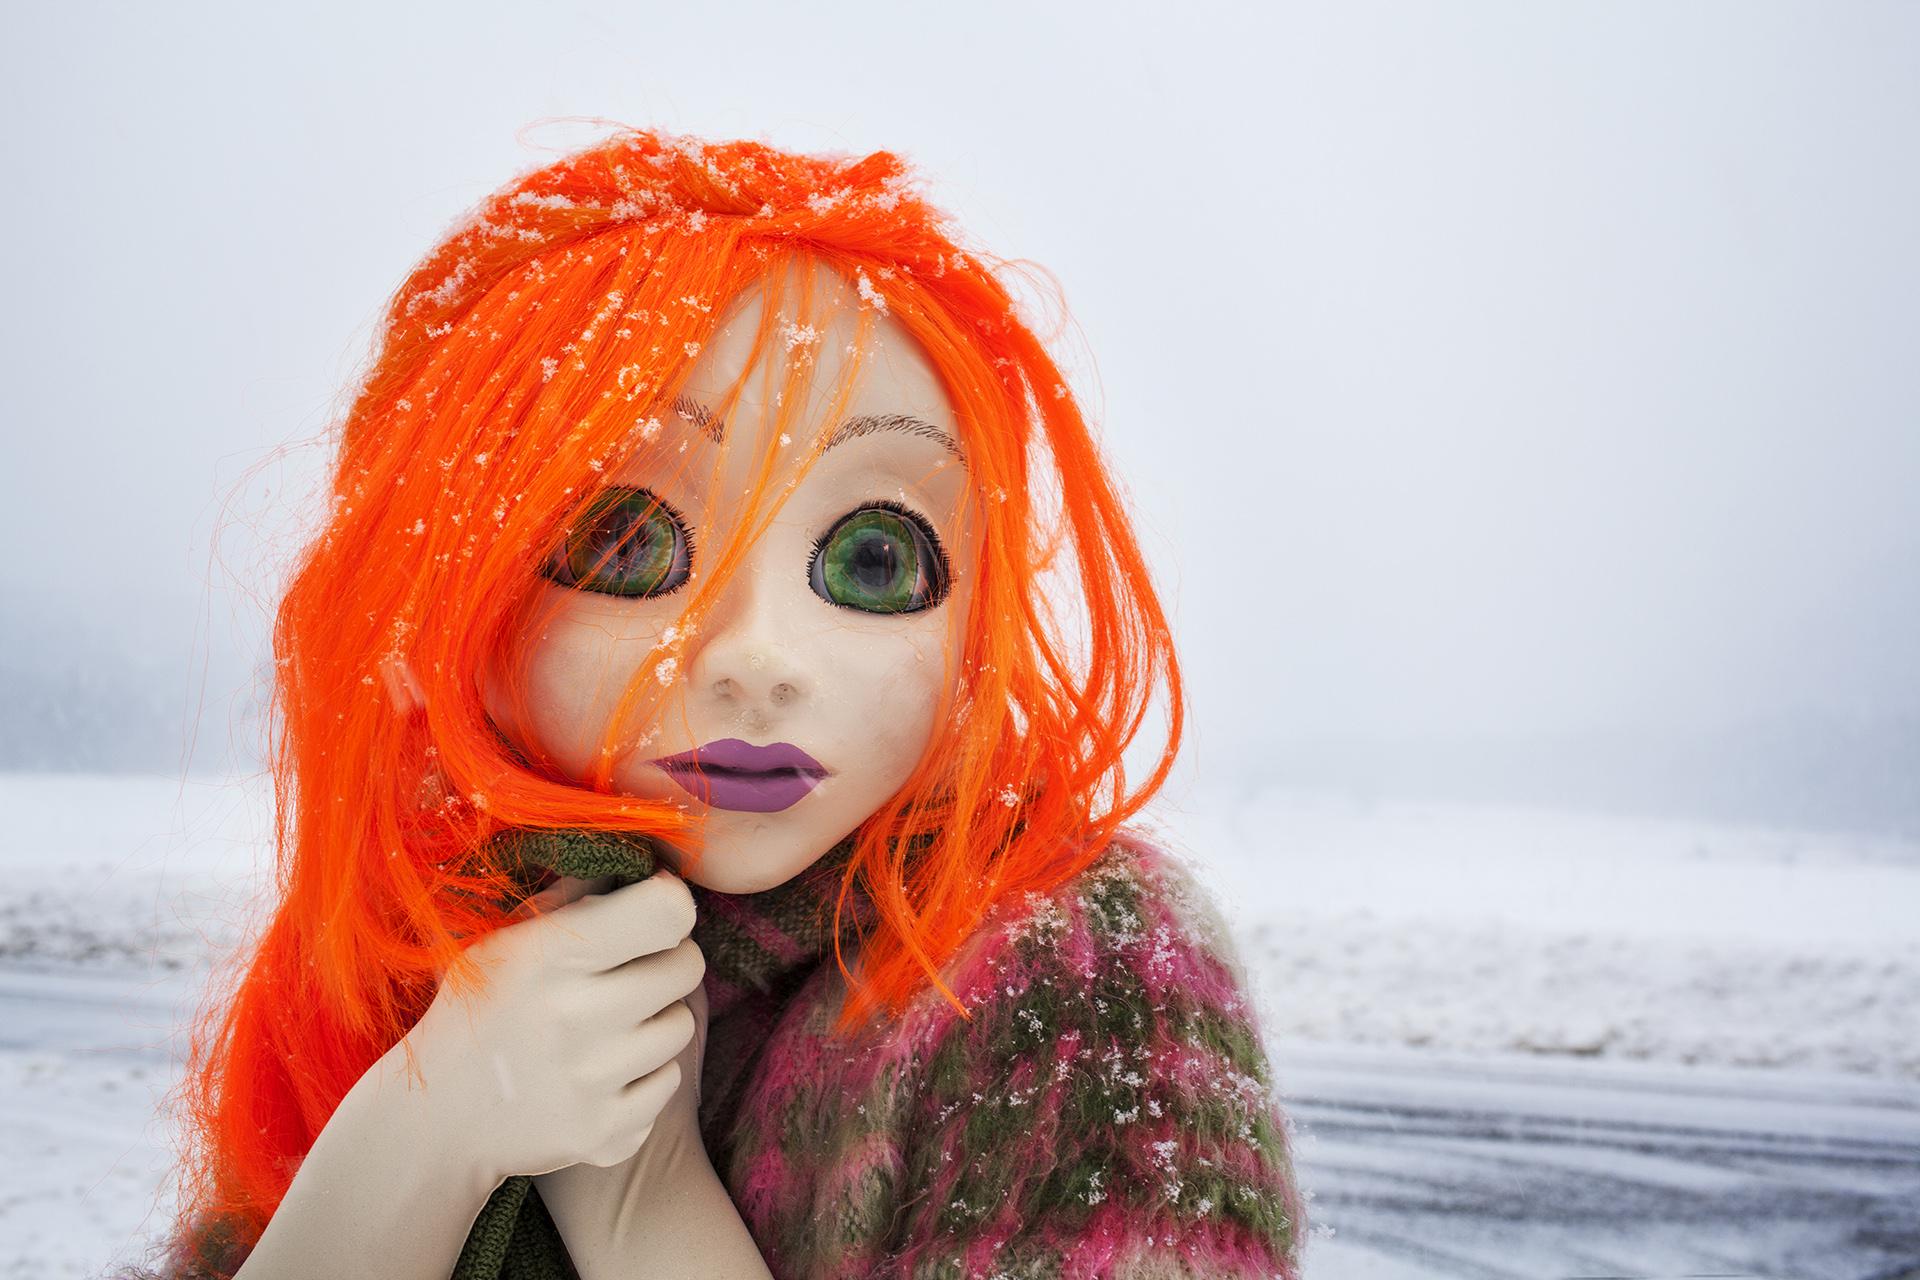 Photographer Laurie Simmons Captures Lifelike Dolls, Fake People Chicago News WTTW pic